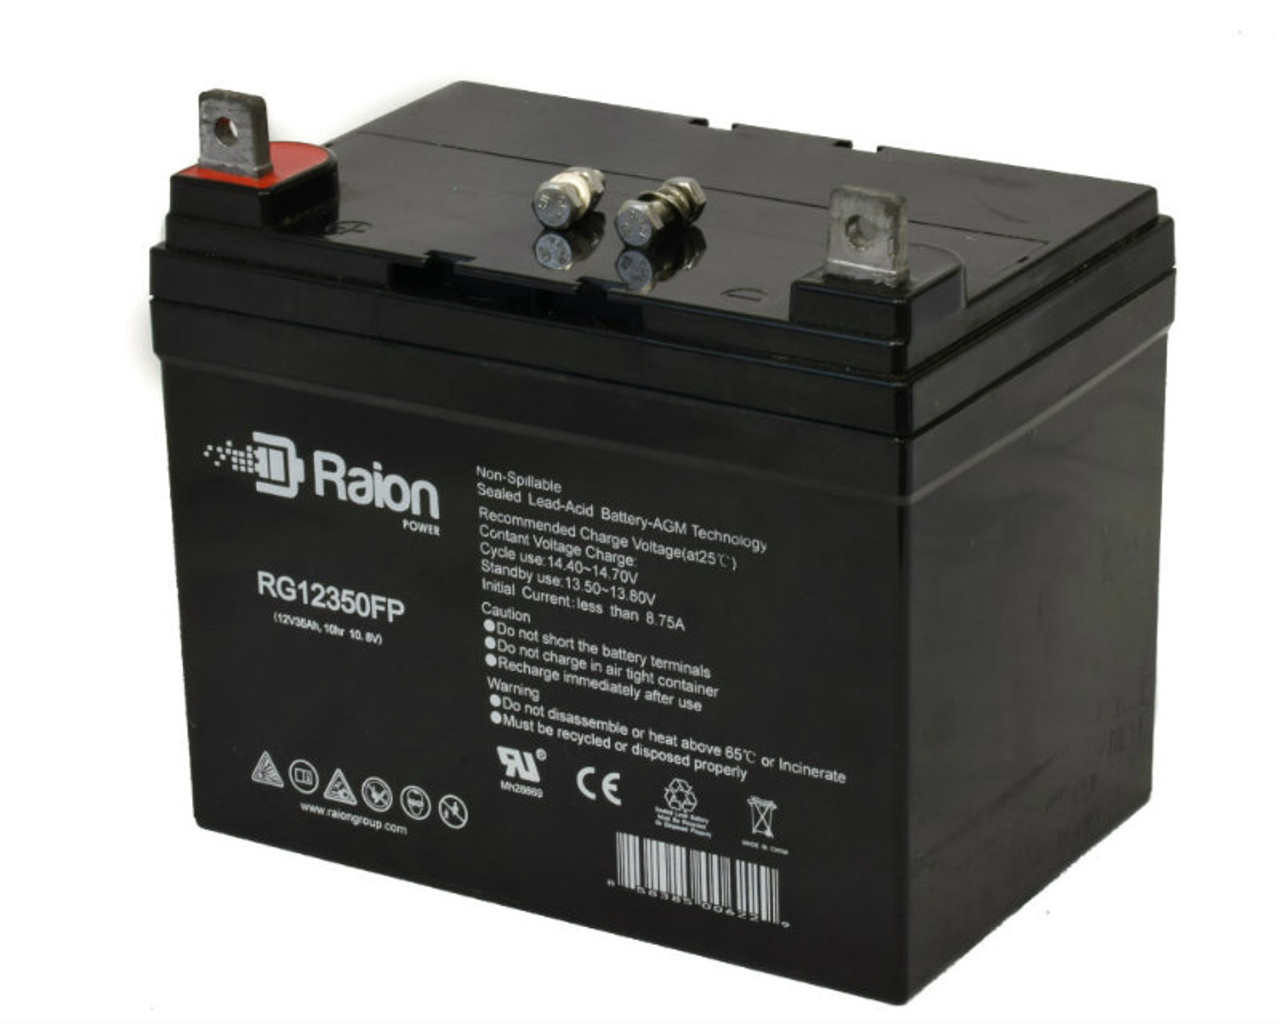 Raion Power Replacement 12V 35Ah RG12350FP Mobility Scooter Battery for Pace Saver Plus III (All)